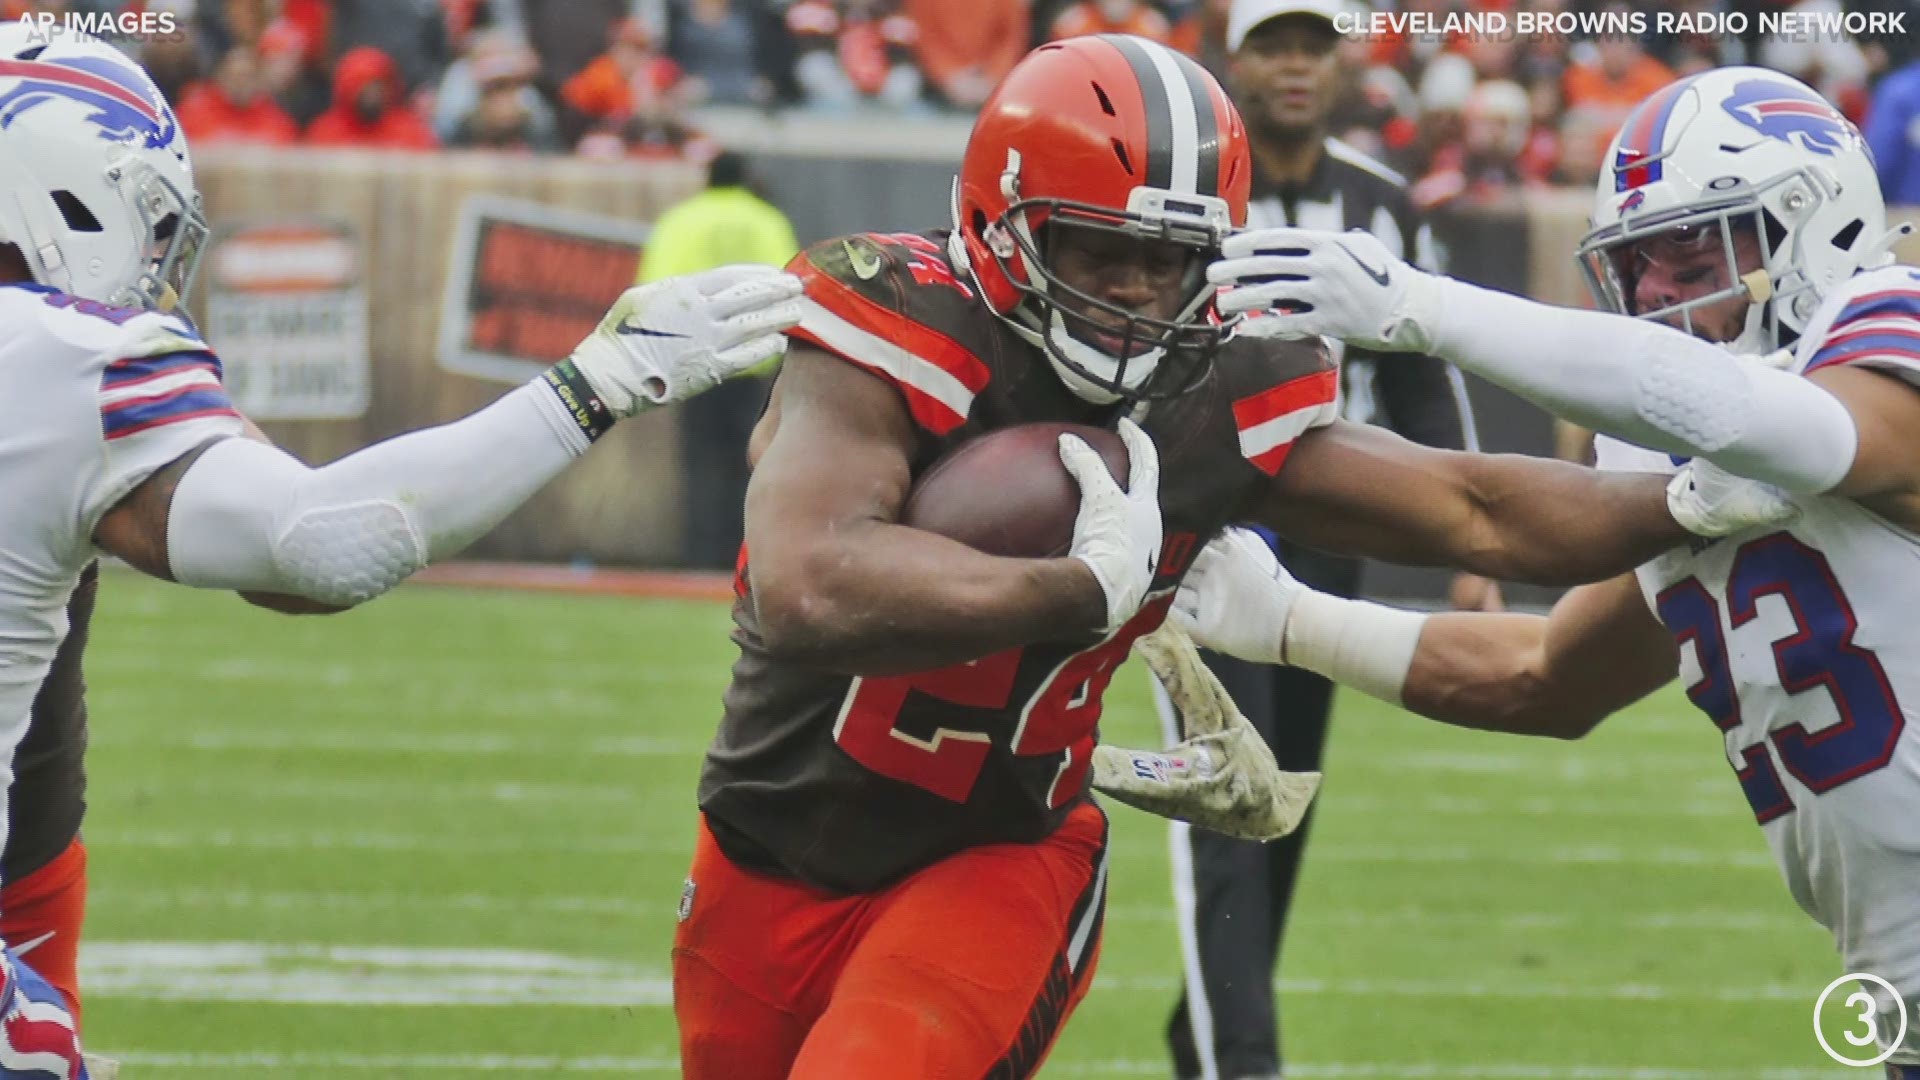 Red zone problems!  Despite running eight plays inside the two-yard line, the Browns failed to score a touchdown on their second offensive series vs. the Bills.